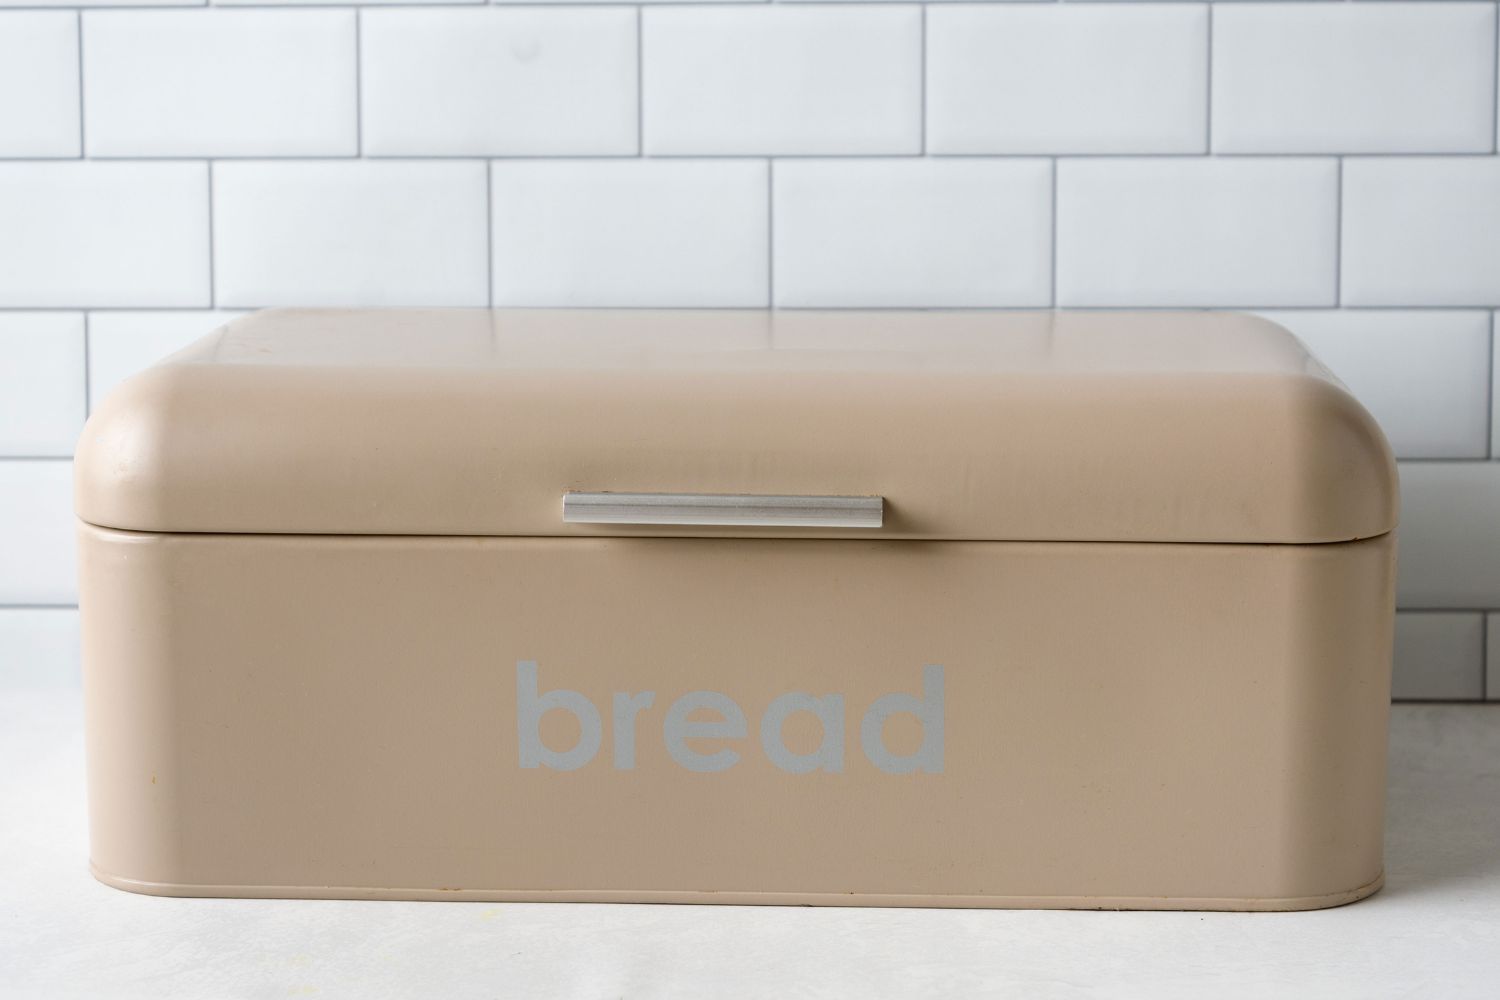 A stainless steel bread box with open-close functionality on a kitchen counter in front of a tiled backsplash.